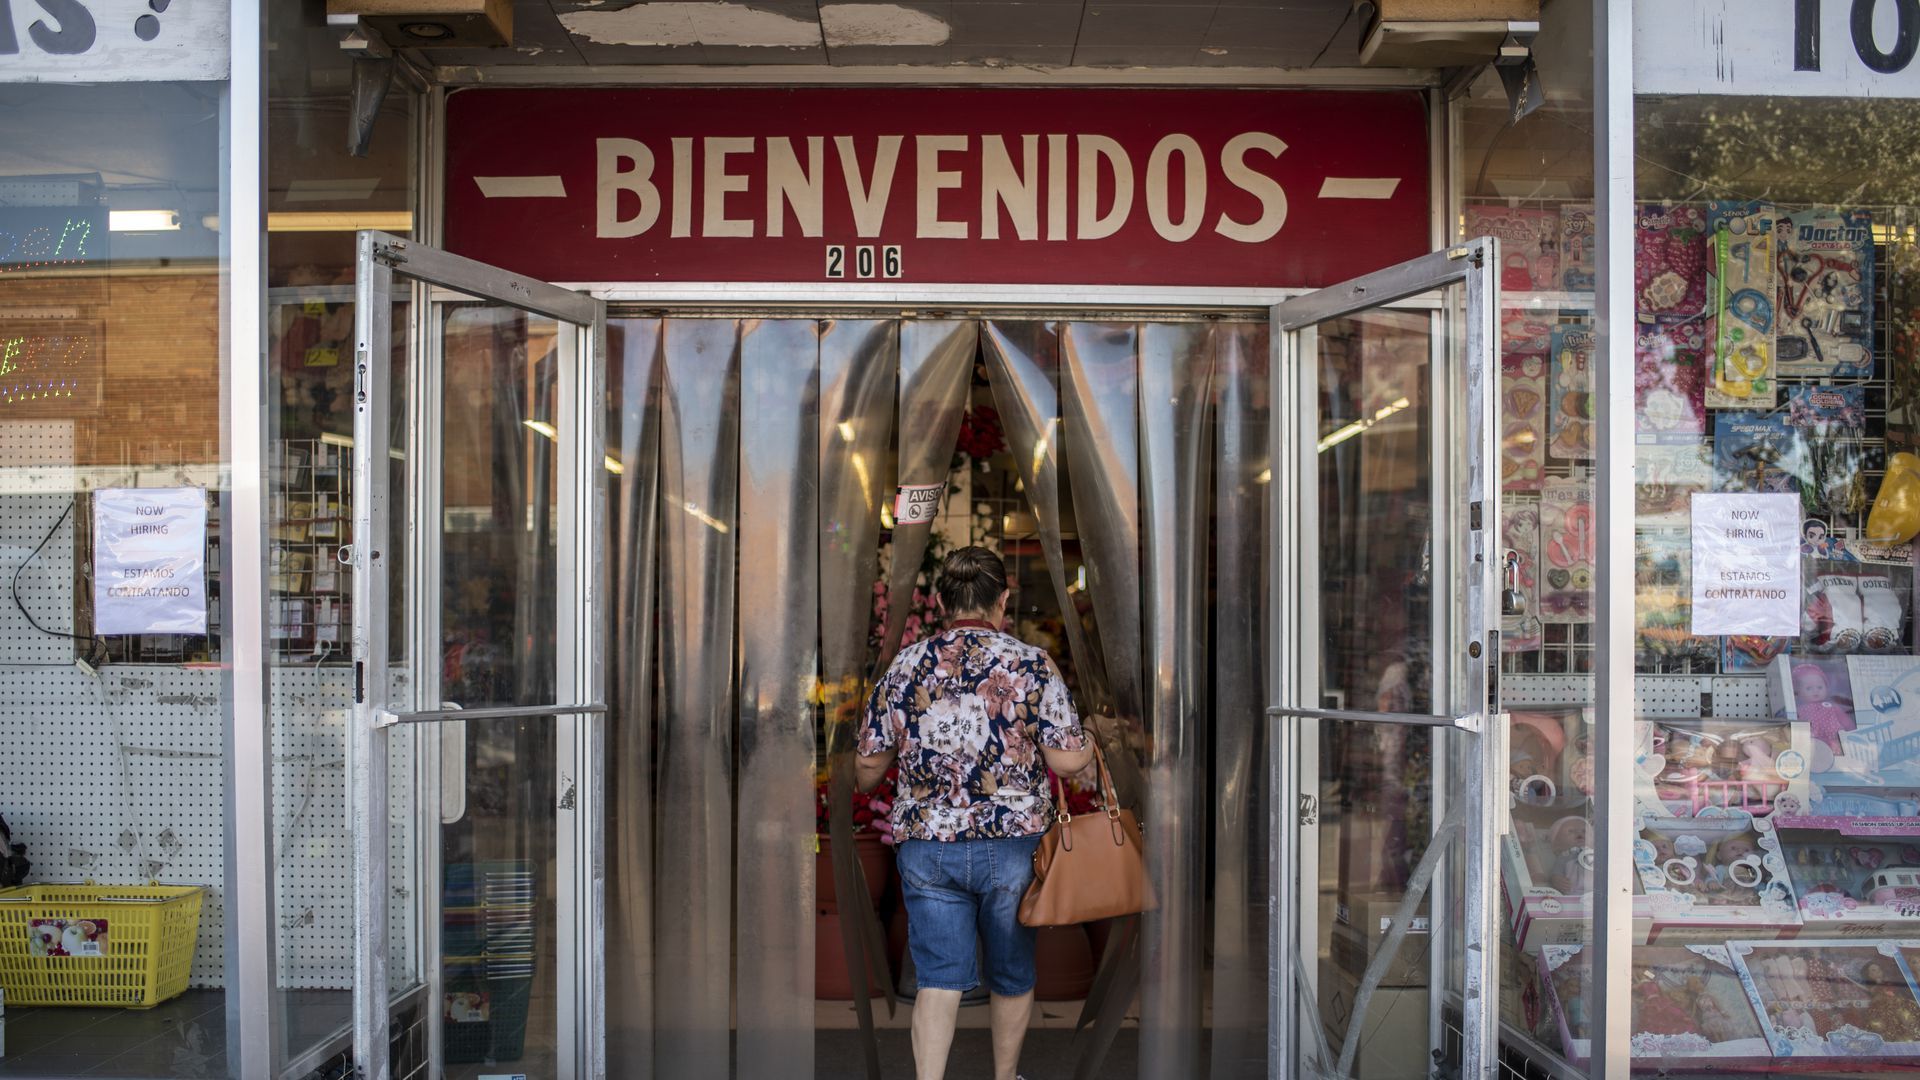 a woman walks into a store with a large sign above it that says "bienvenidos"